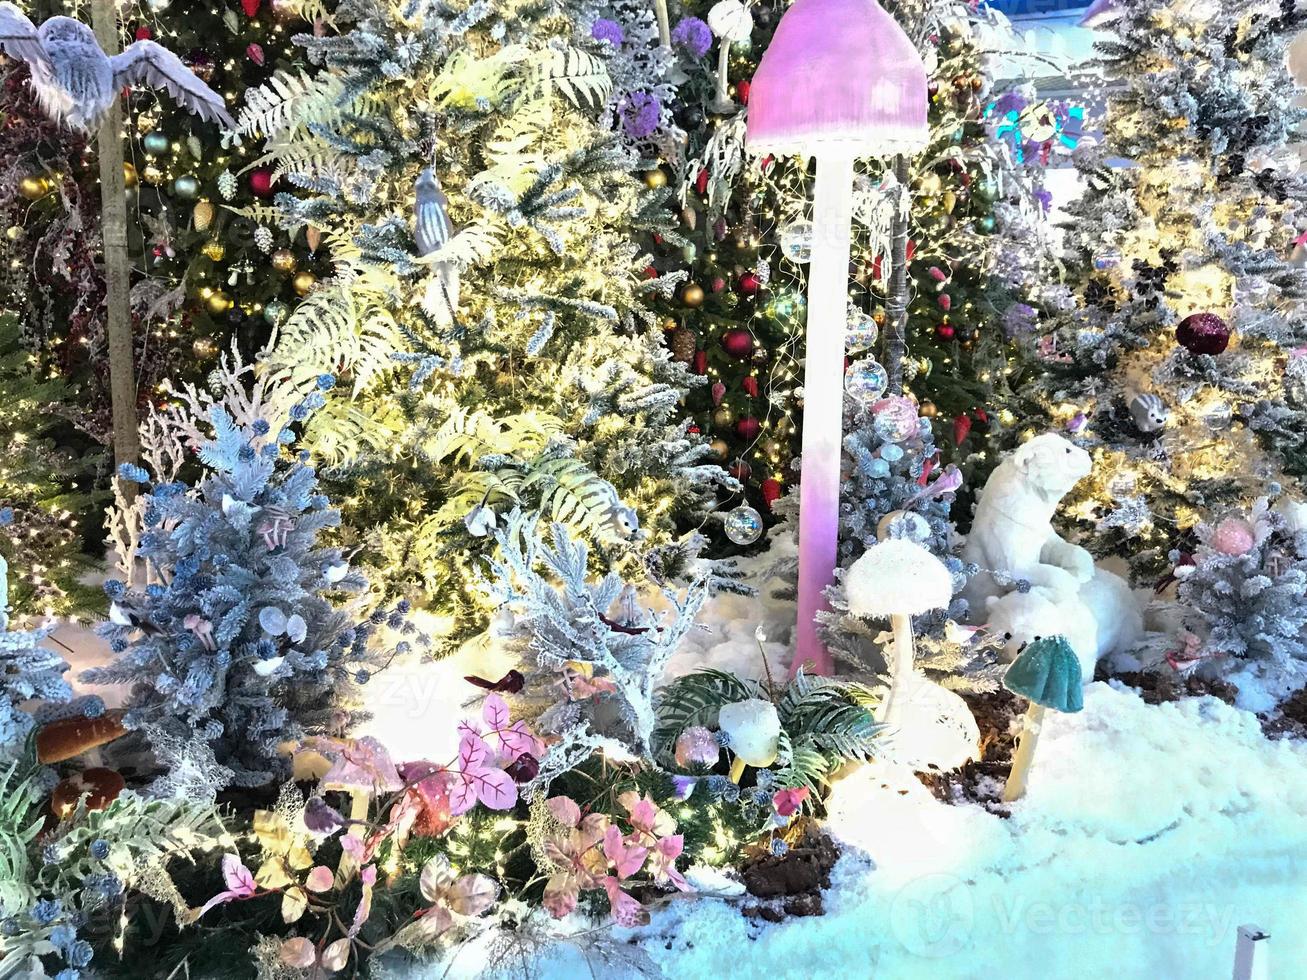 new year cute decorations for the shopping center. artificial Christmas trees with lighting. spruce covered with artificial snow. next to a pink mushroom with a round cap photo